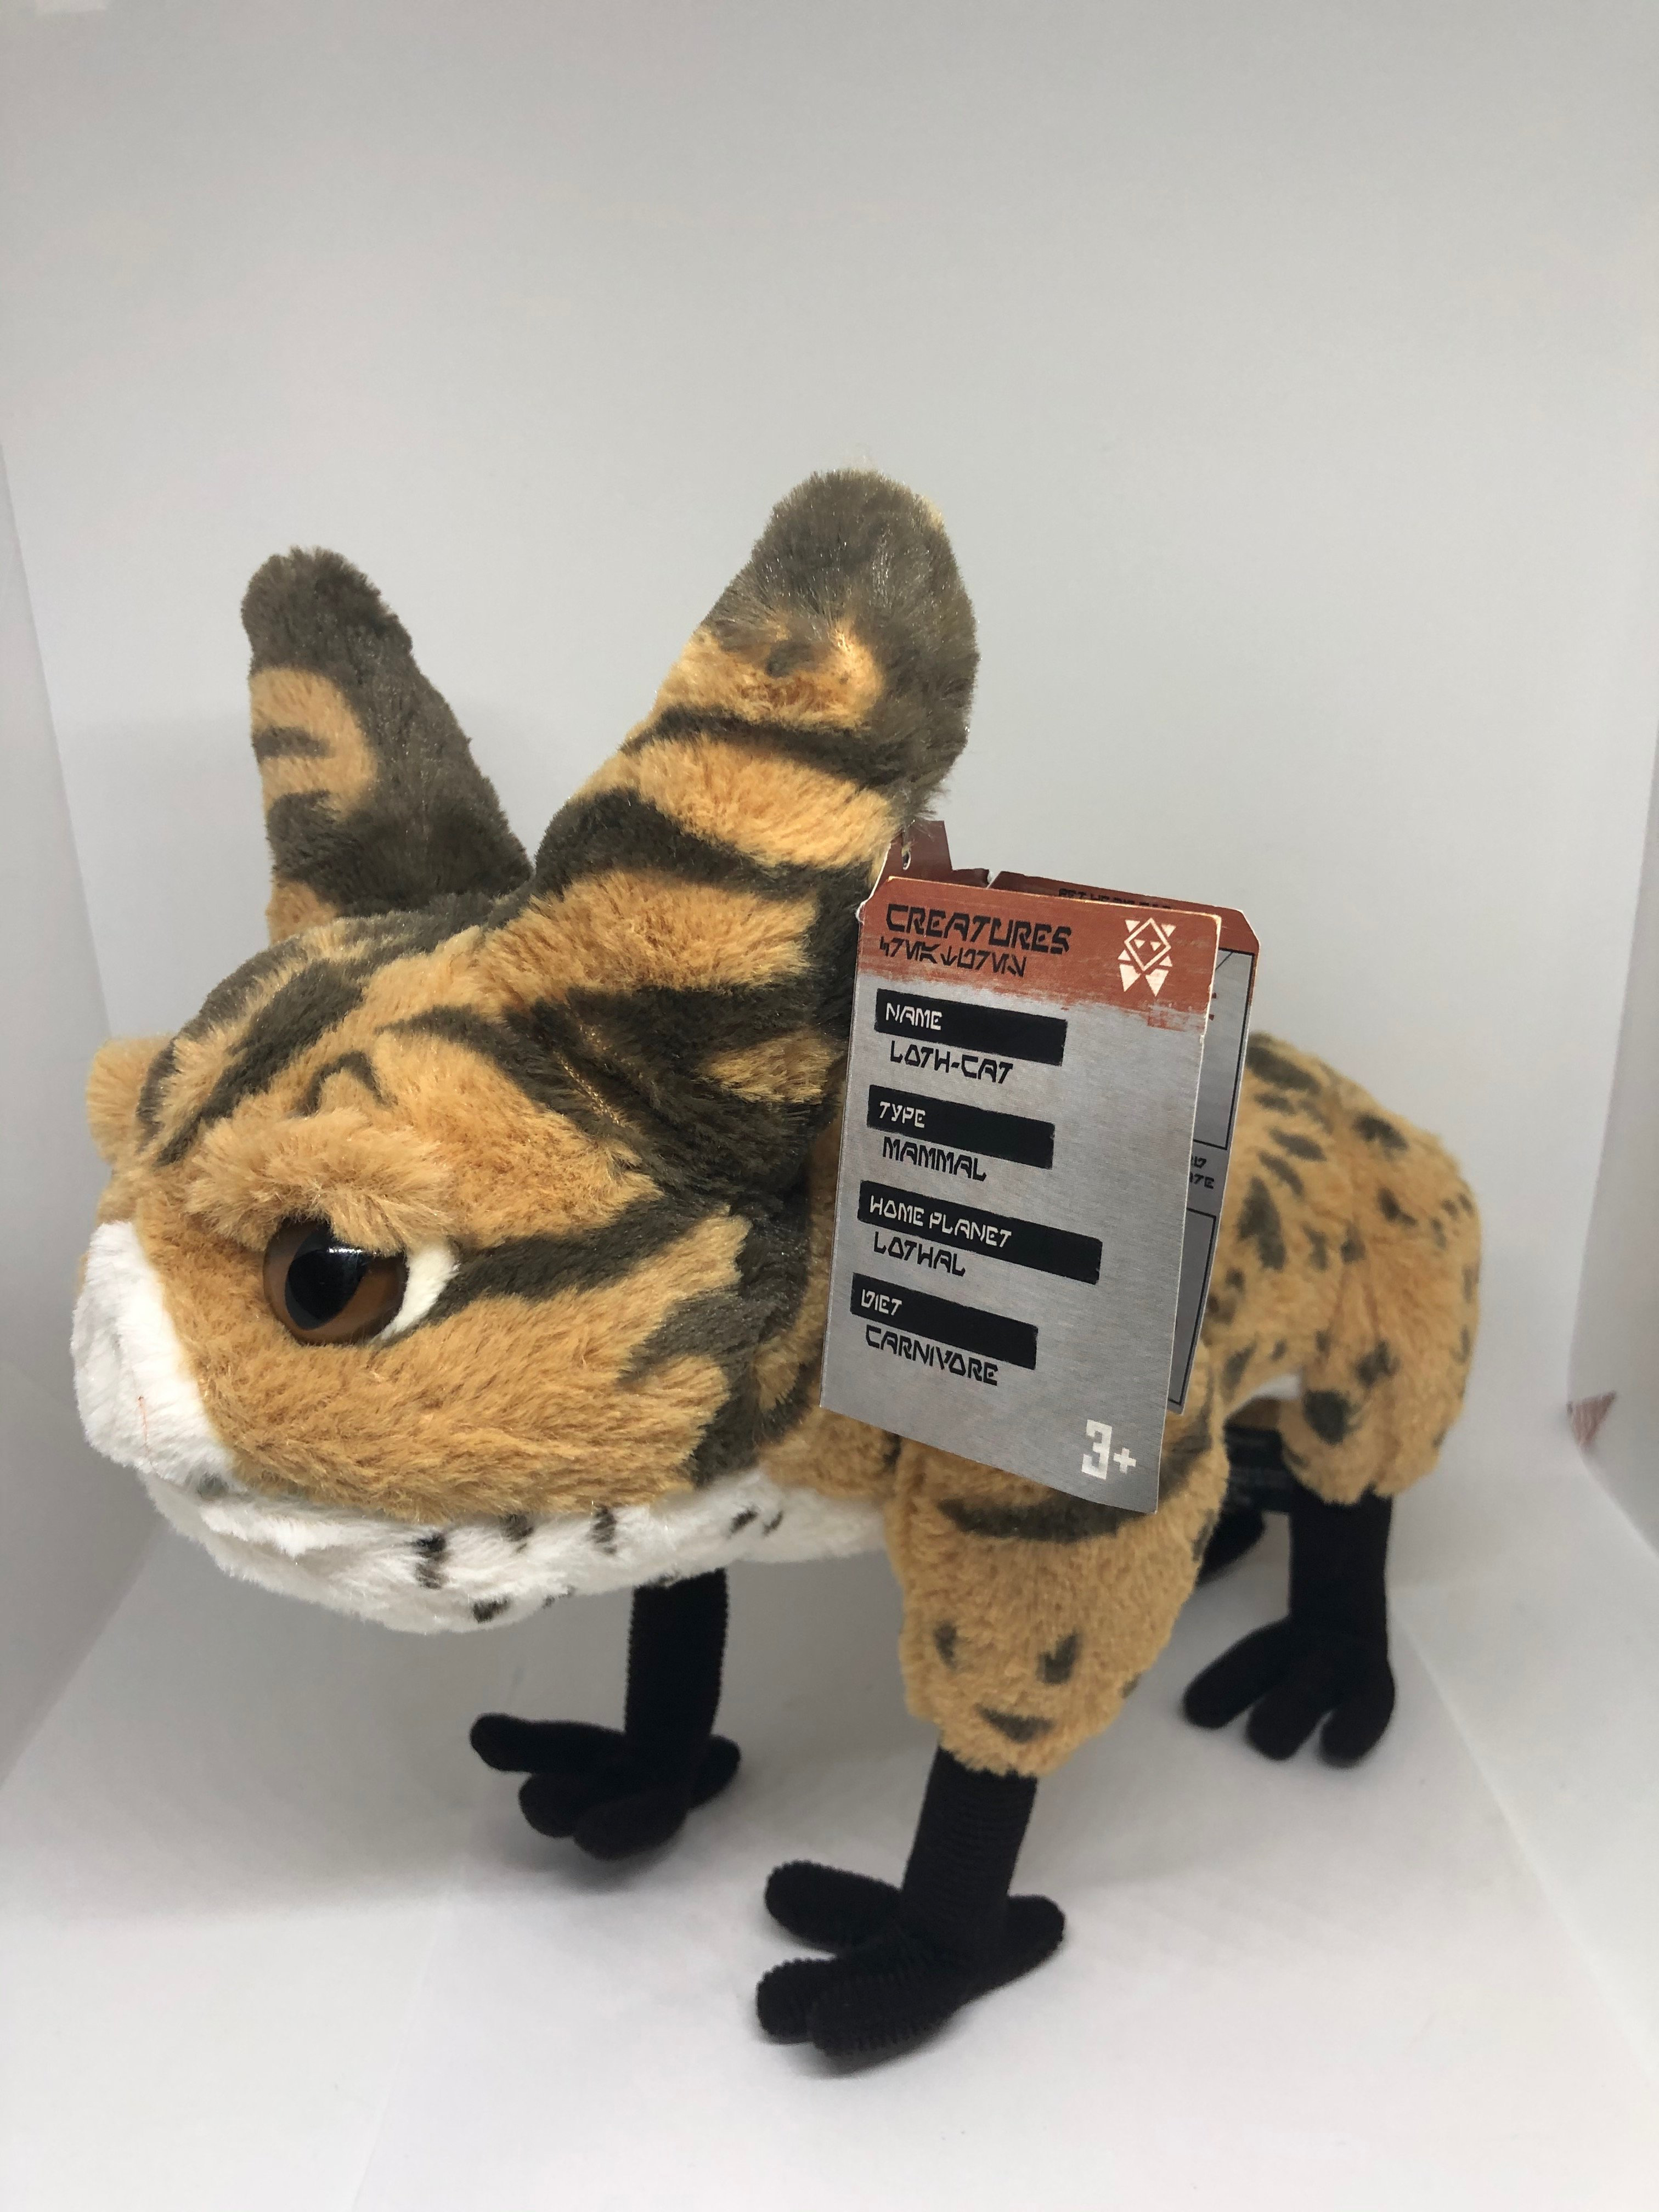 New Galaxy's Edge Loth Cat Talking Plush Toy available now!